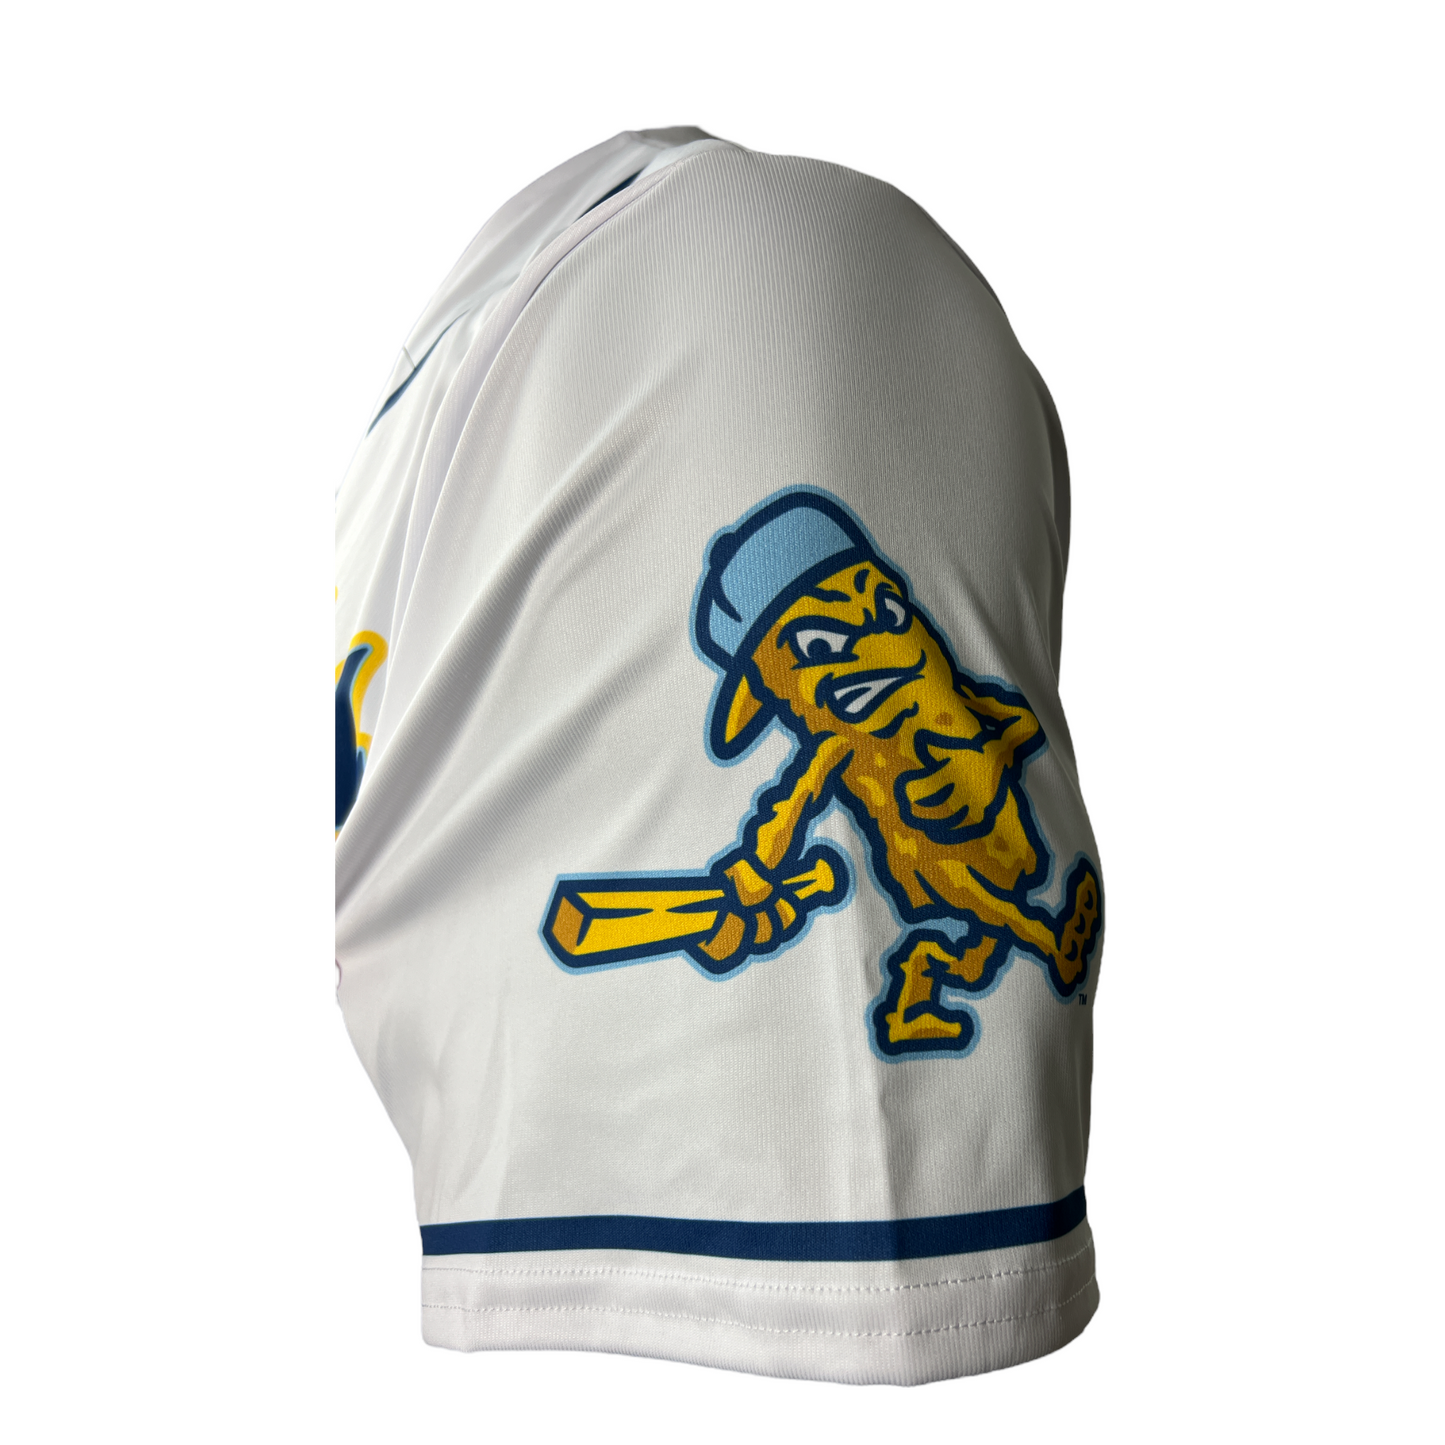 Youth Fish Sticks Home White Jersey